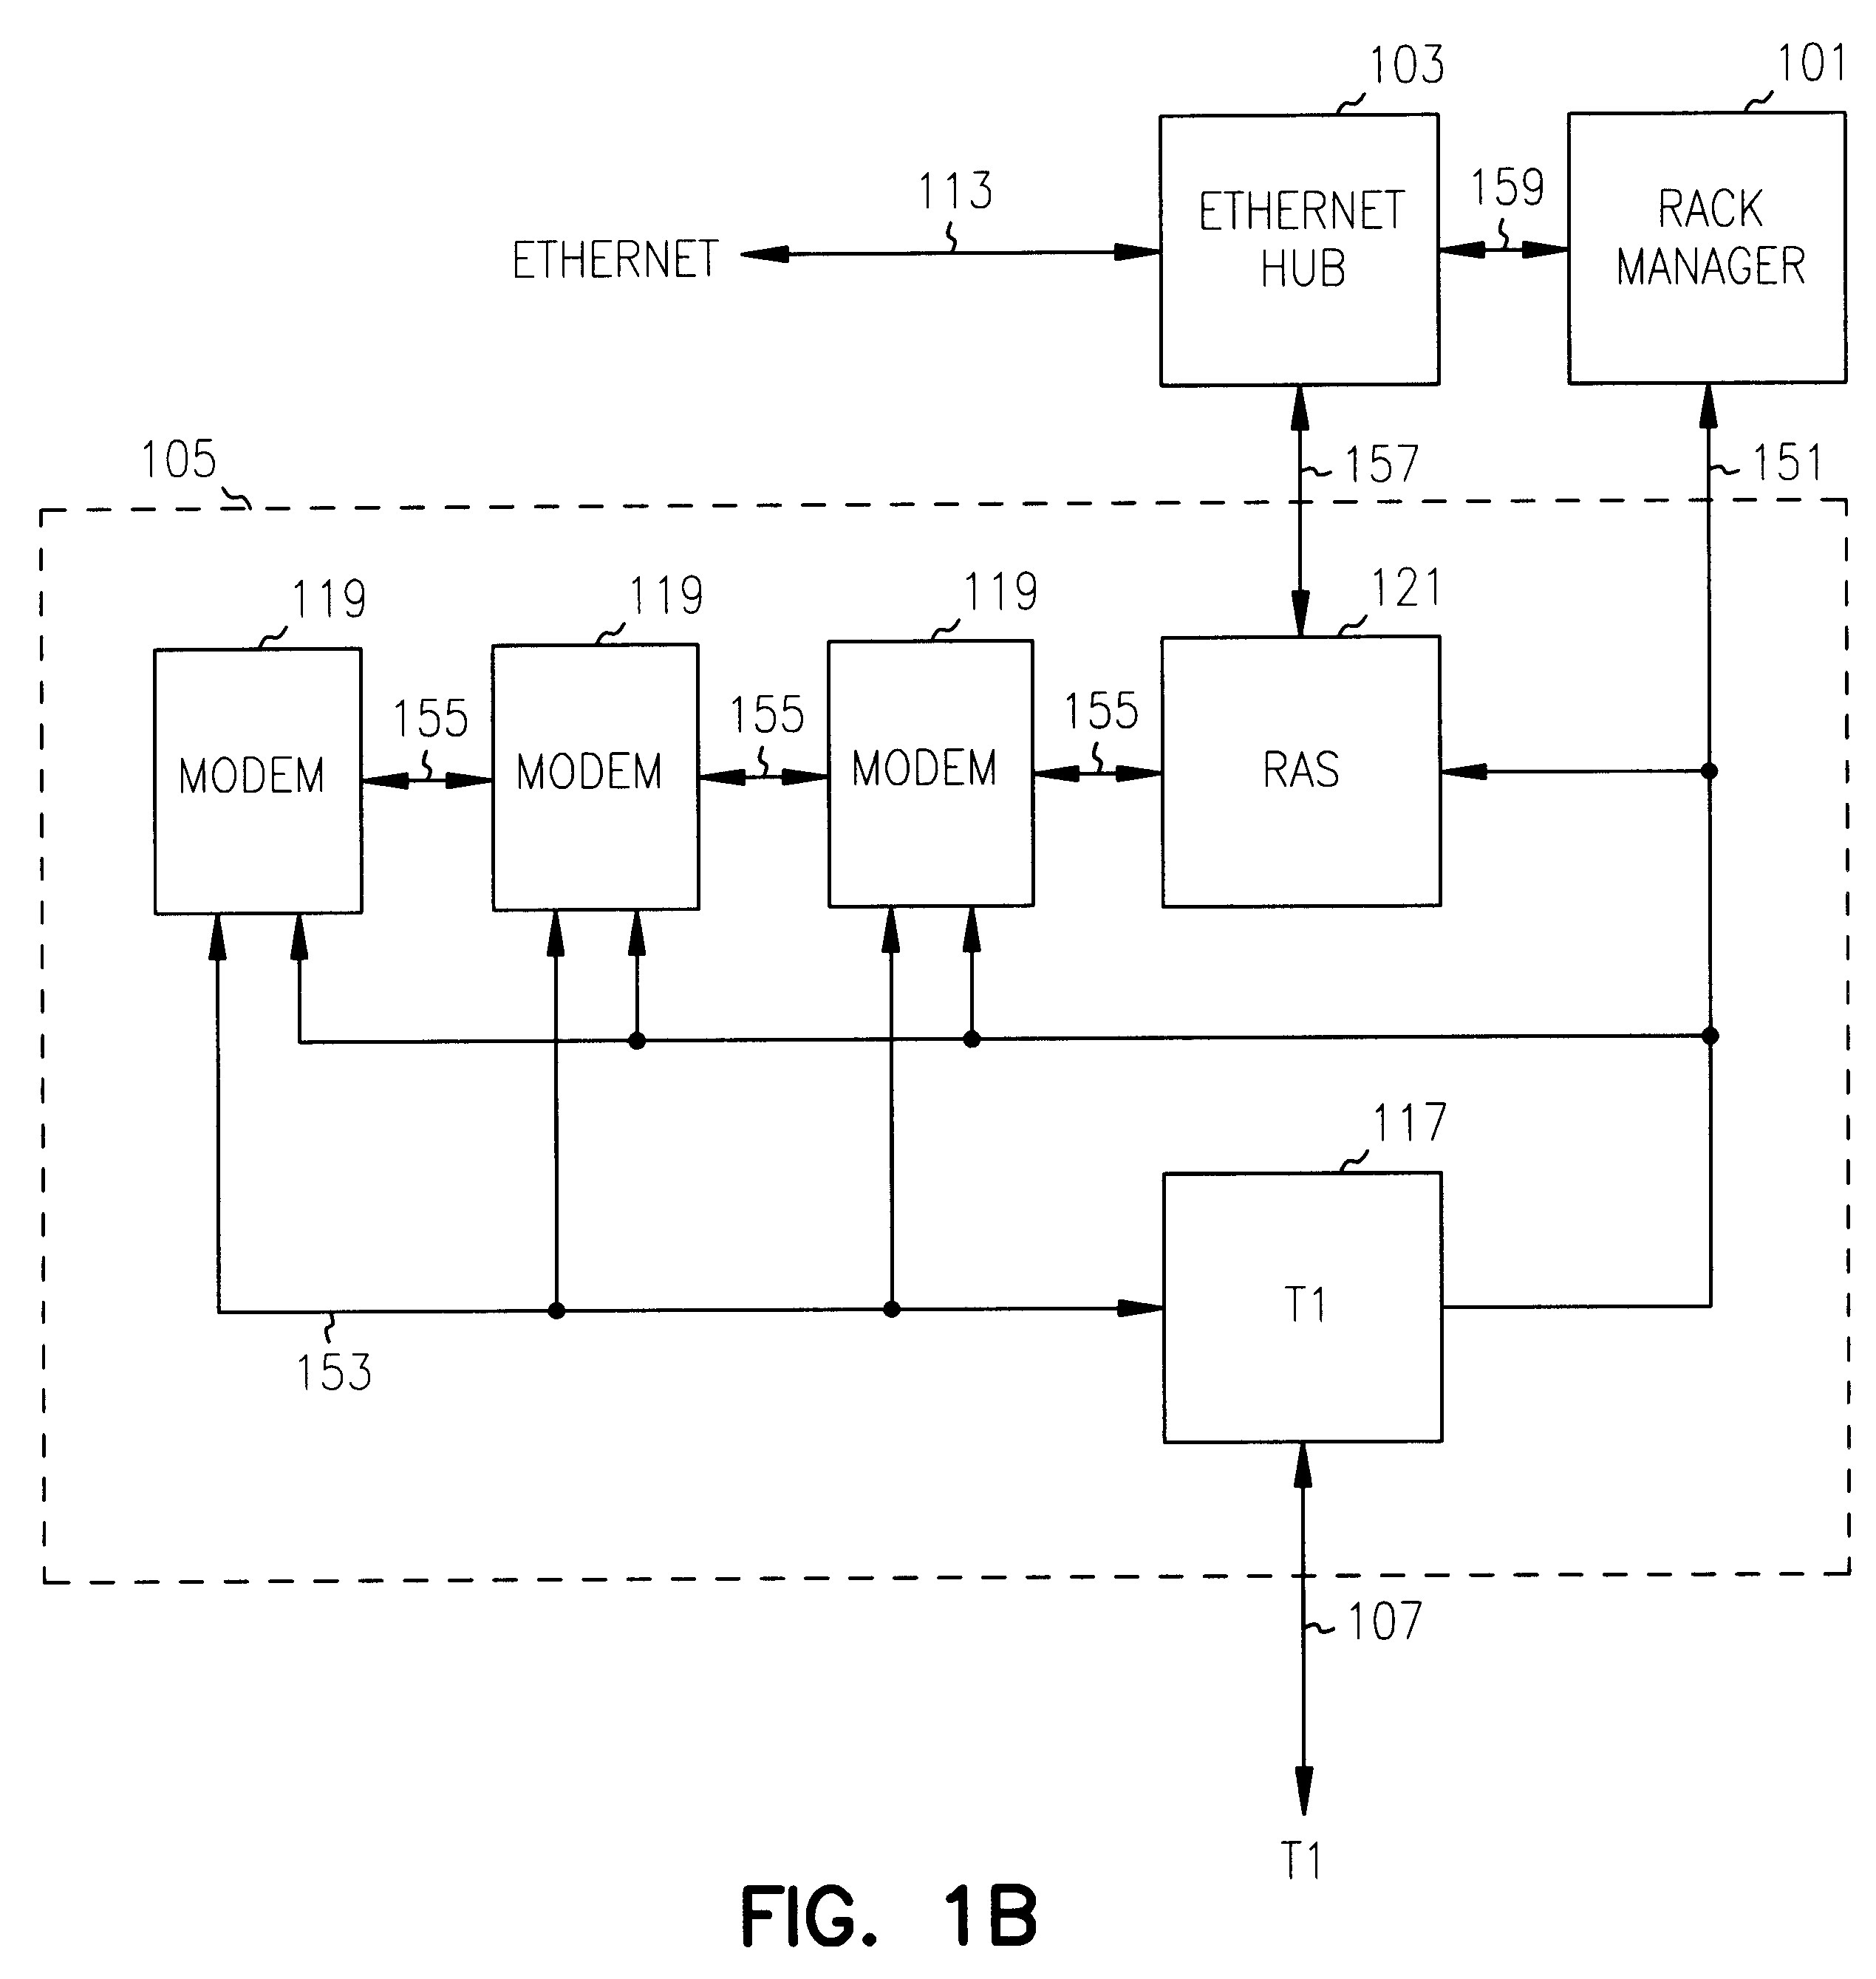 Channel bonding in a remote communications server system